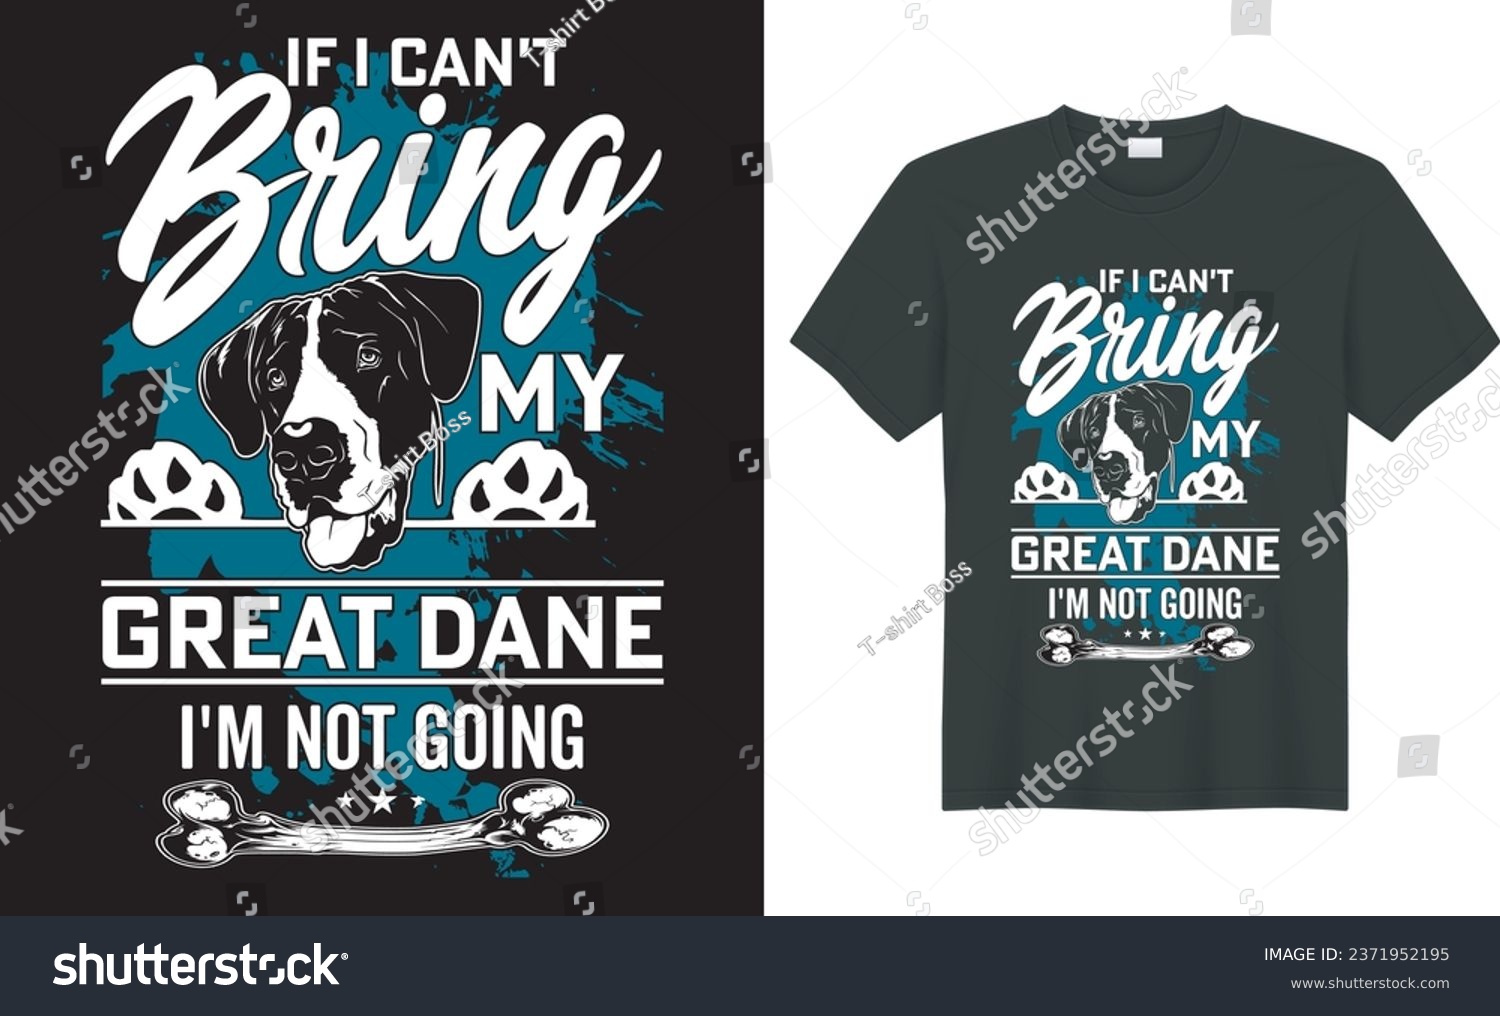 SVG of  Great Dane silhouette vintage and retro t-shirt design. If I can't bring my great dane i'm not goin. perfect for print item dog t-shirt, coffee mug, poster, cards, pillow cover, sticker, Canvas desig svg